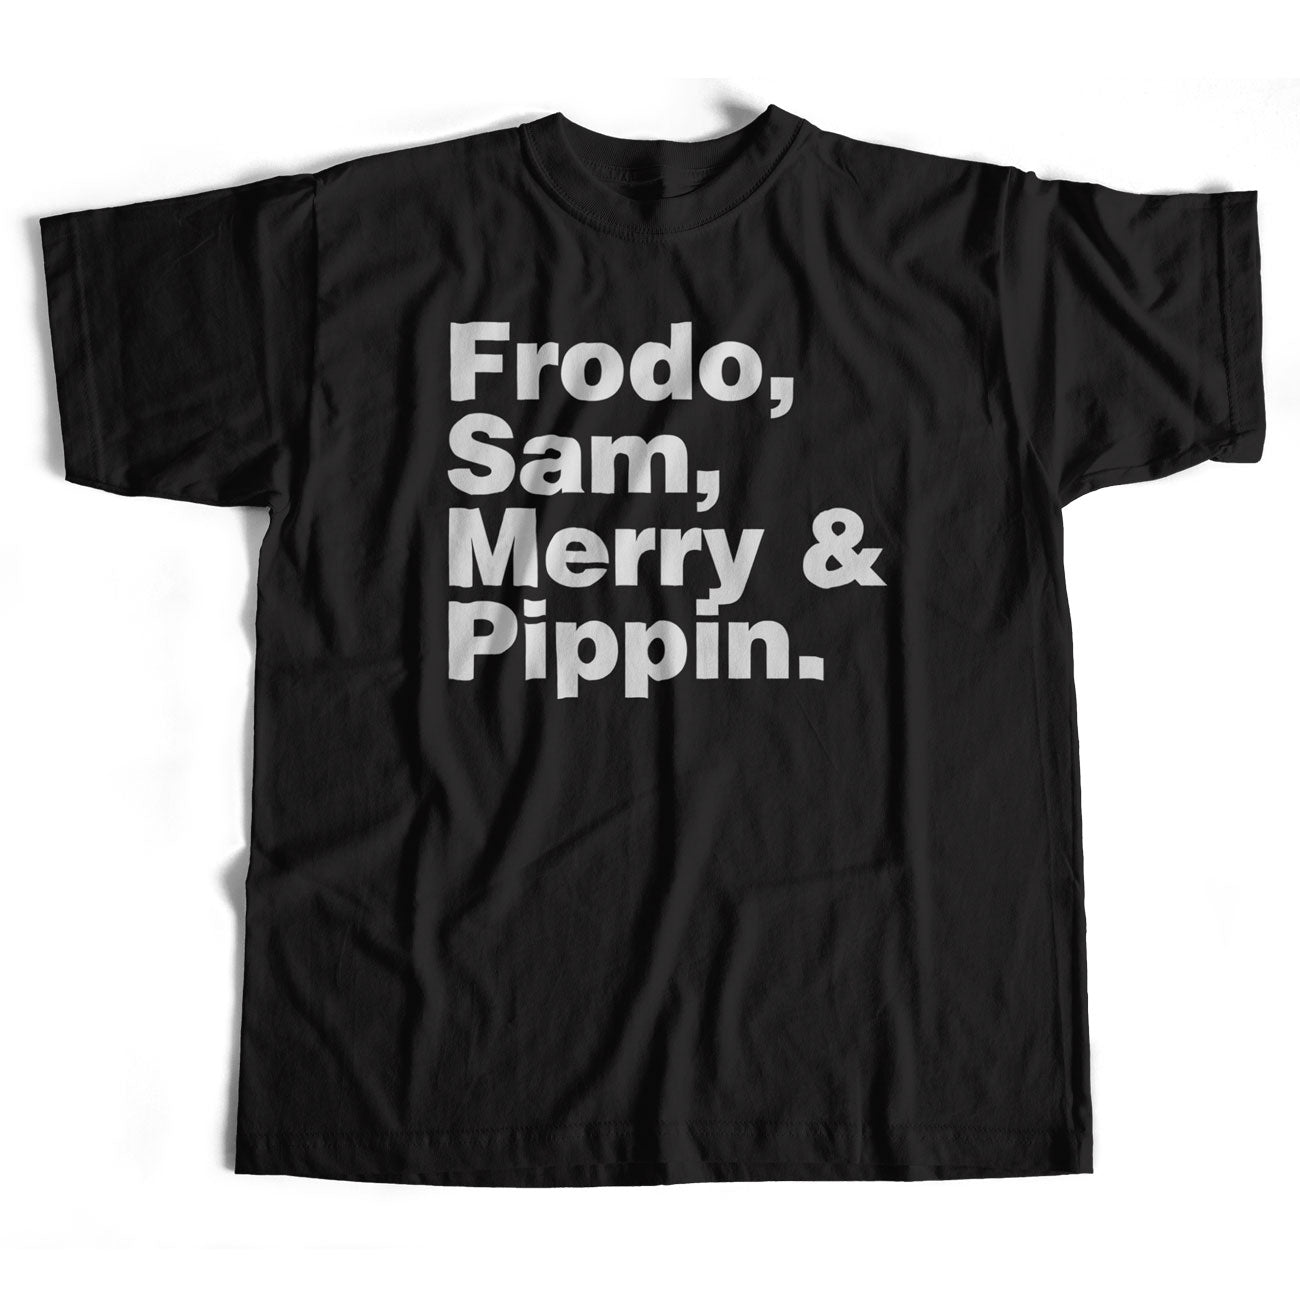 Frodo, Sam, Merry & Pippin Names T shirt for Lord Of The Rings afficionados